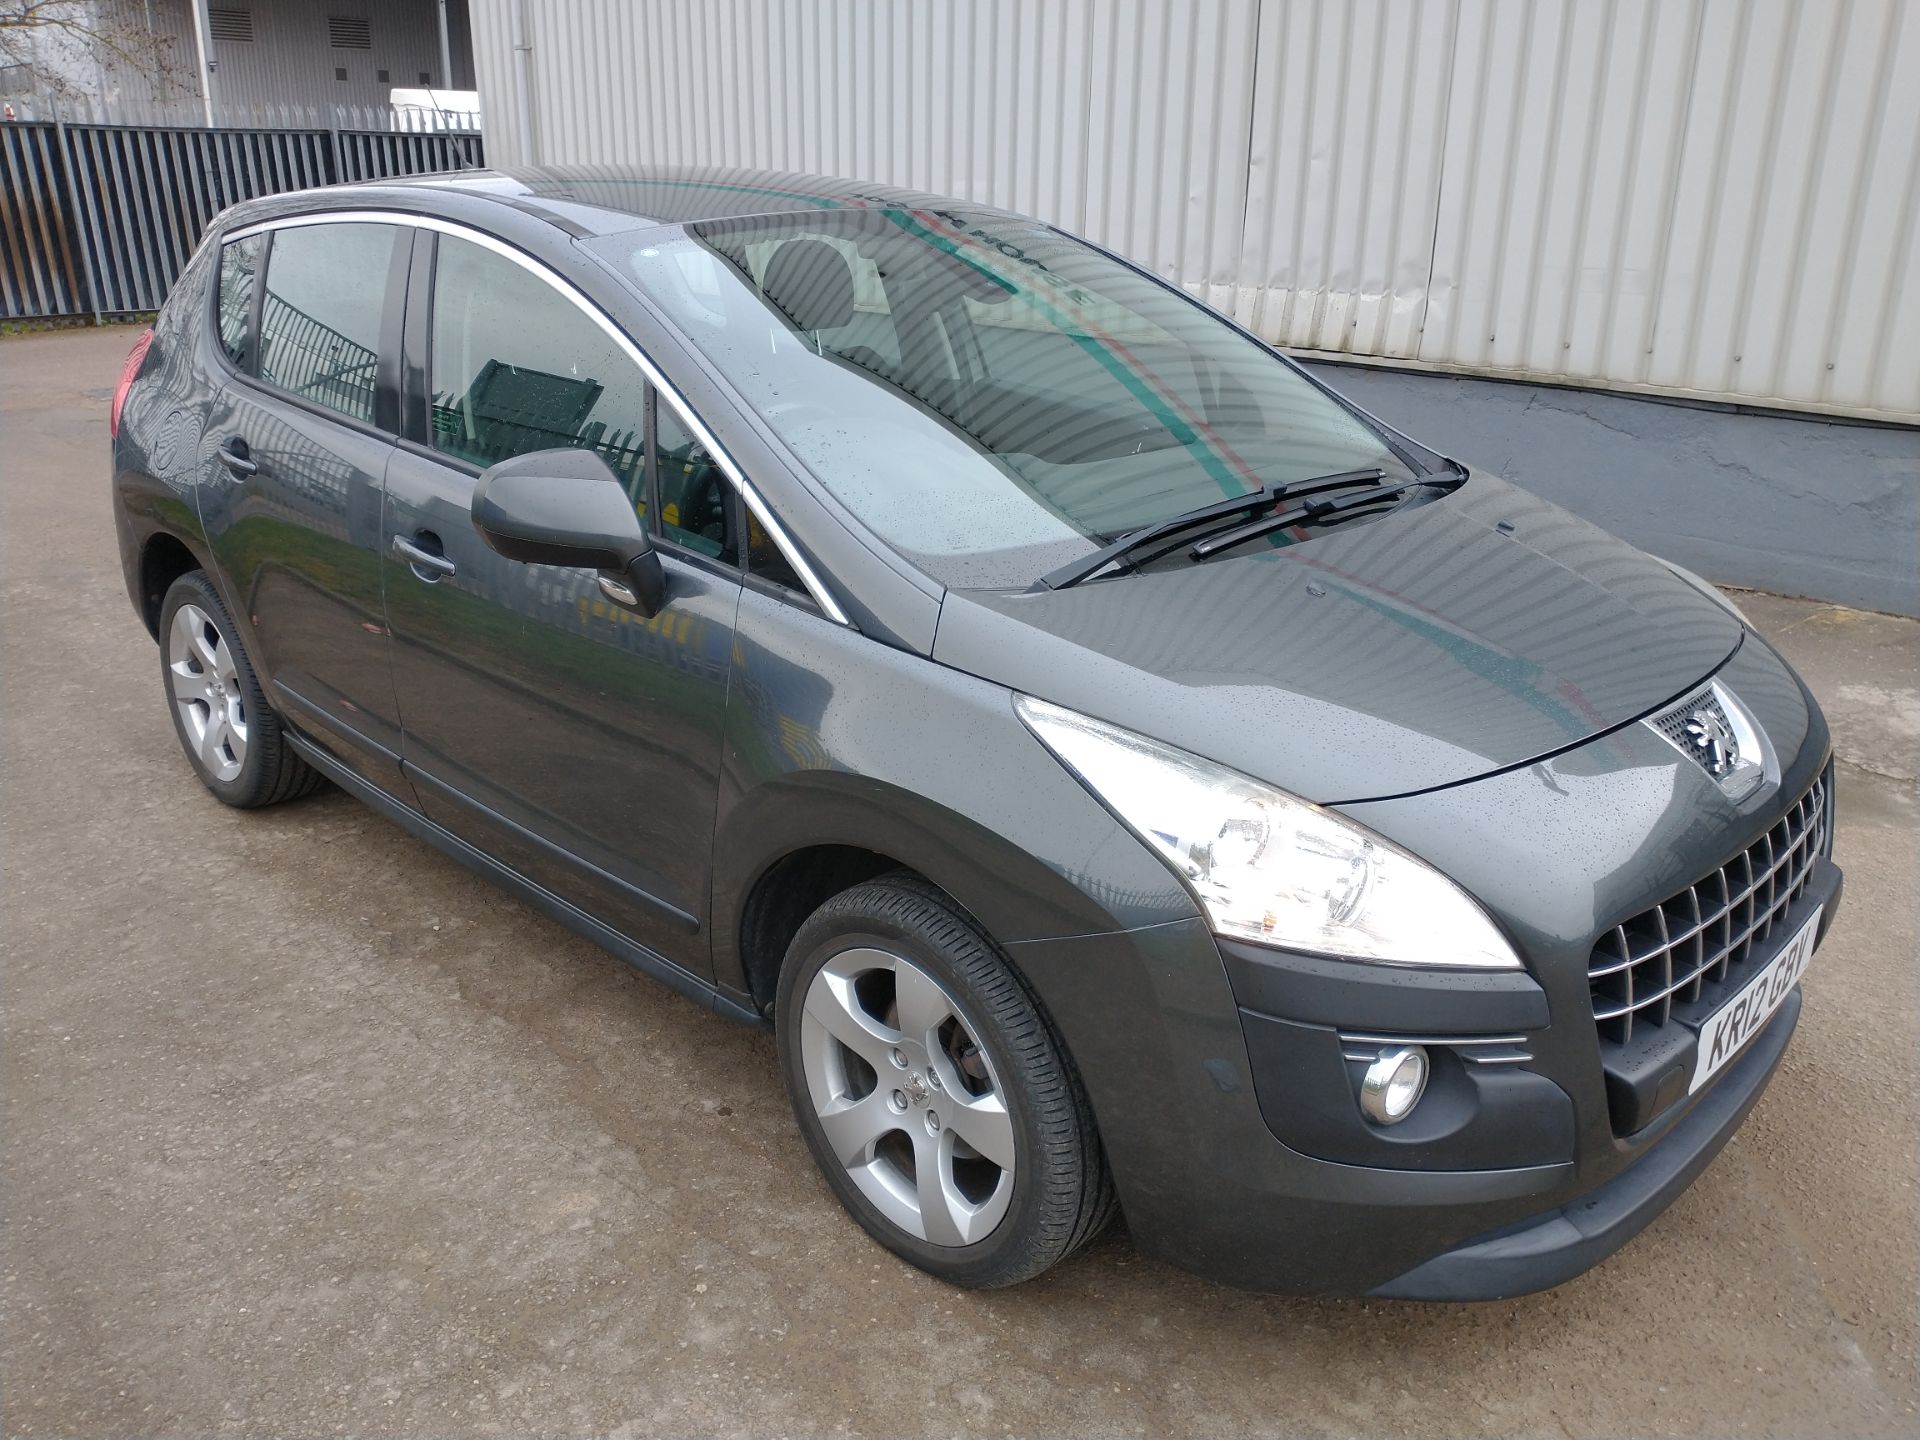 2012 Peugeot 3008 Active HDI 1.6 5DR SUV - CL505 - NO VAT ON THE HAMM - Image 2 of 19